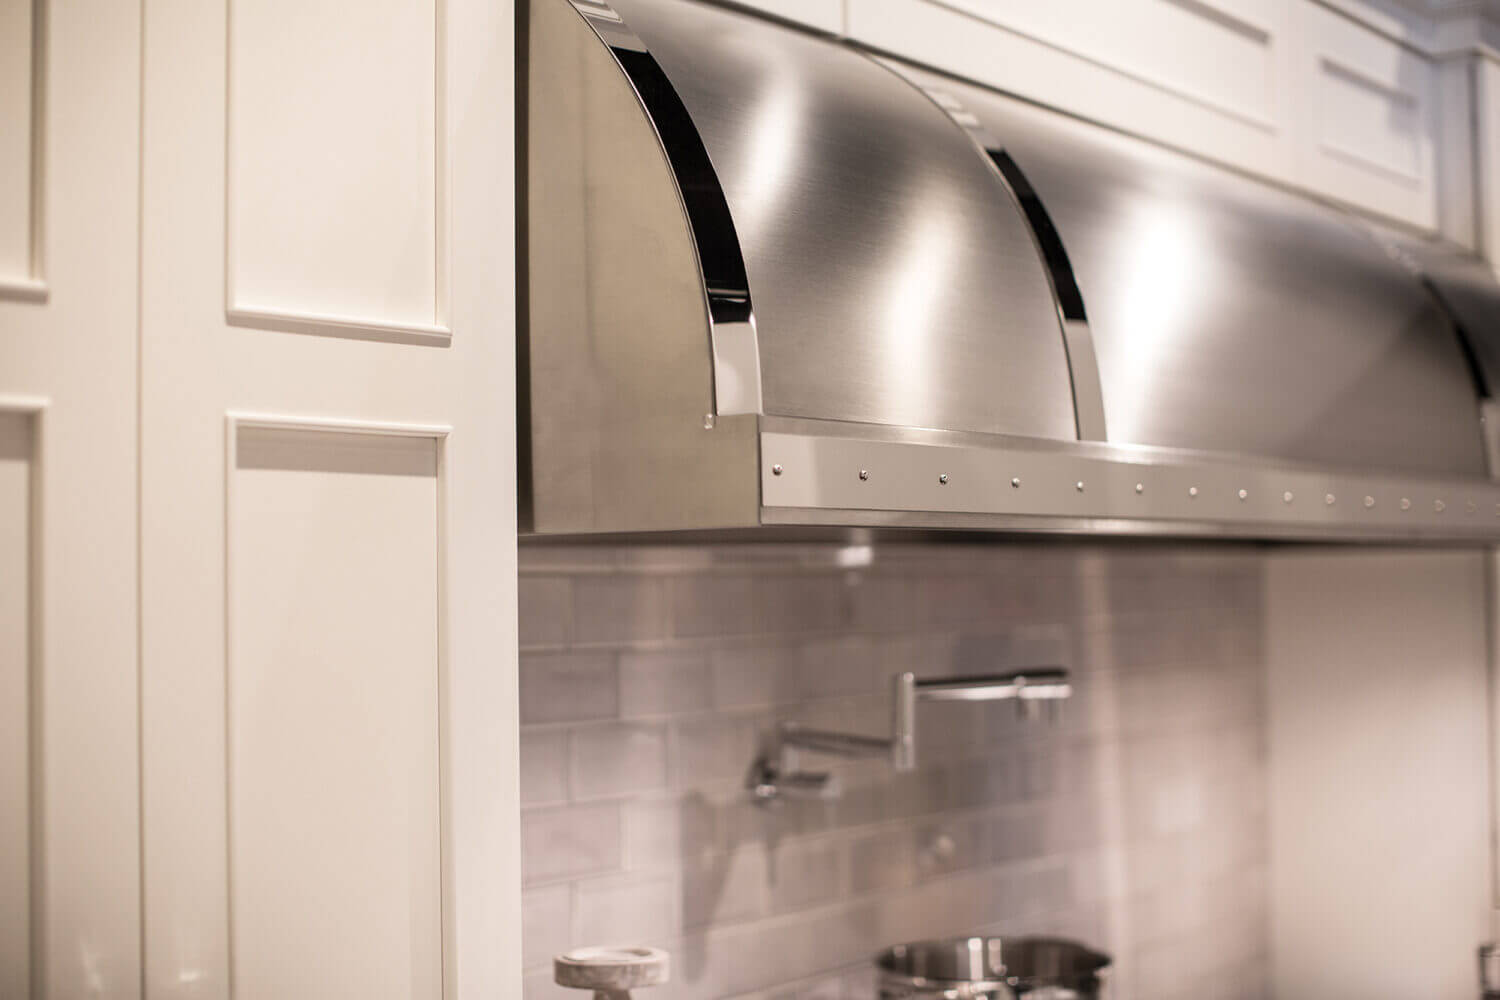 A close up of the stainless steel hood and white painted cabinets in a newly remodeled kitchen.